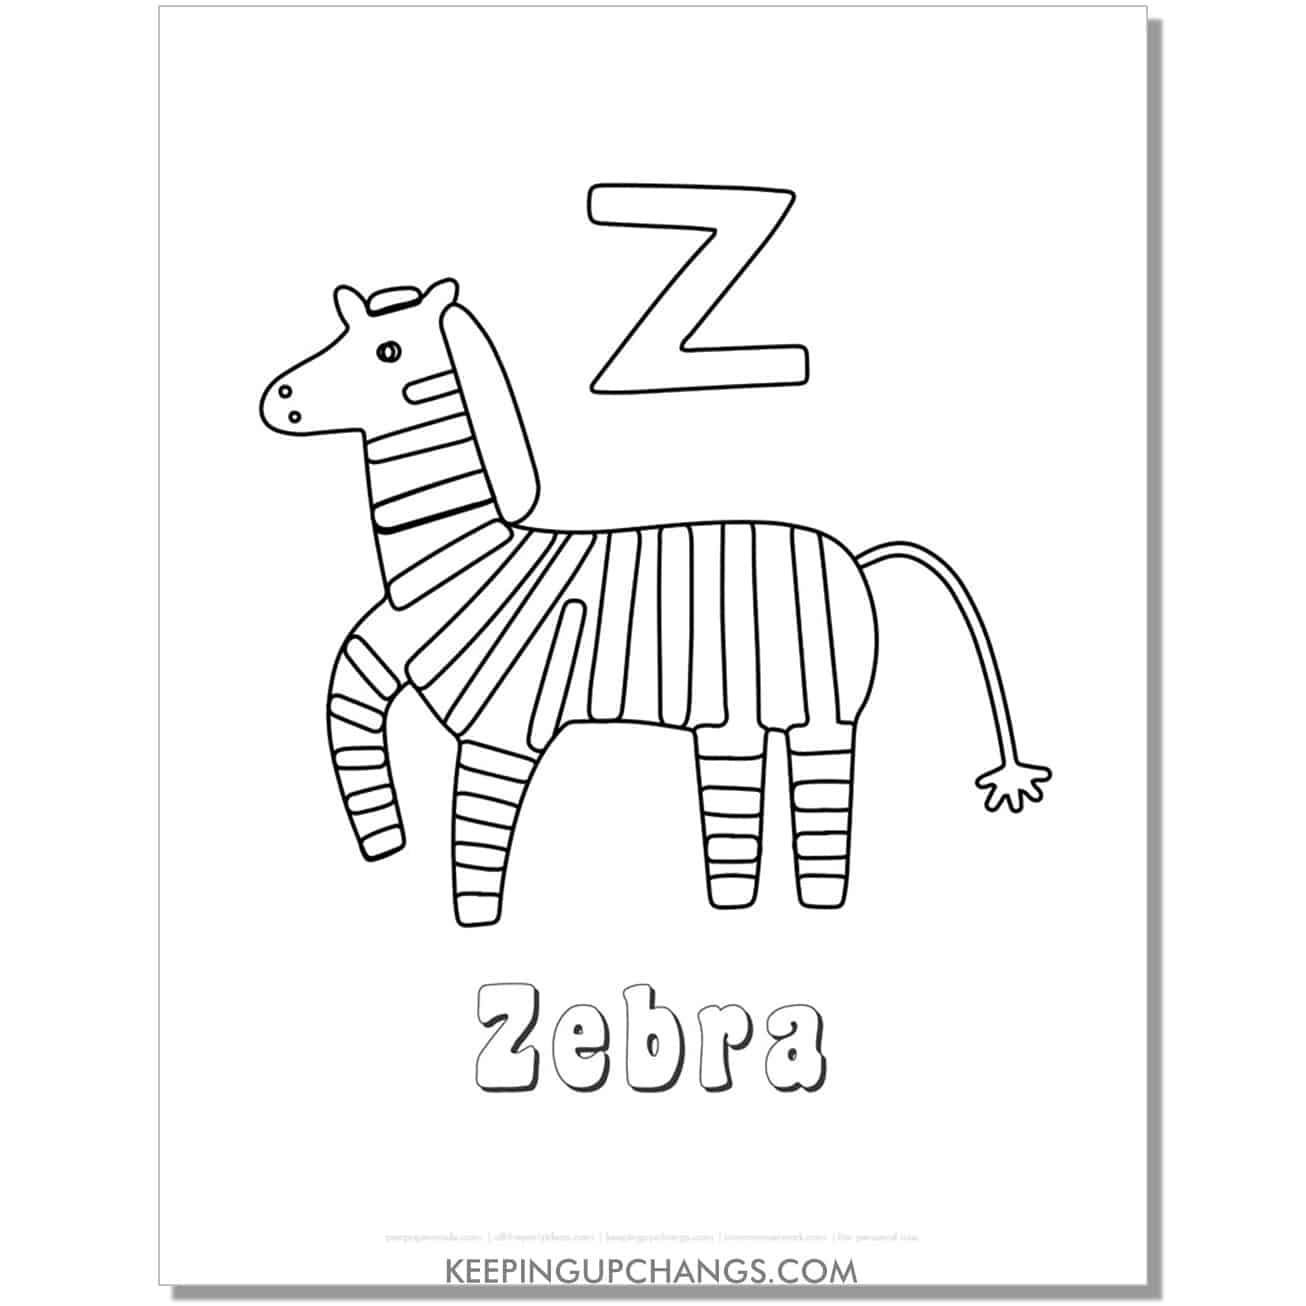 fun abc z coloring page with zebra hand drawing.